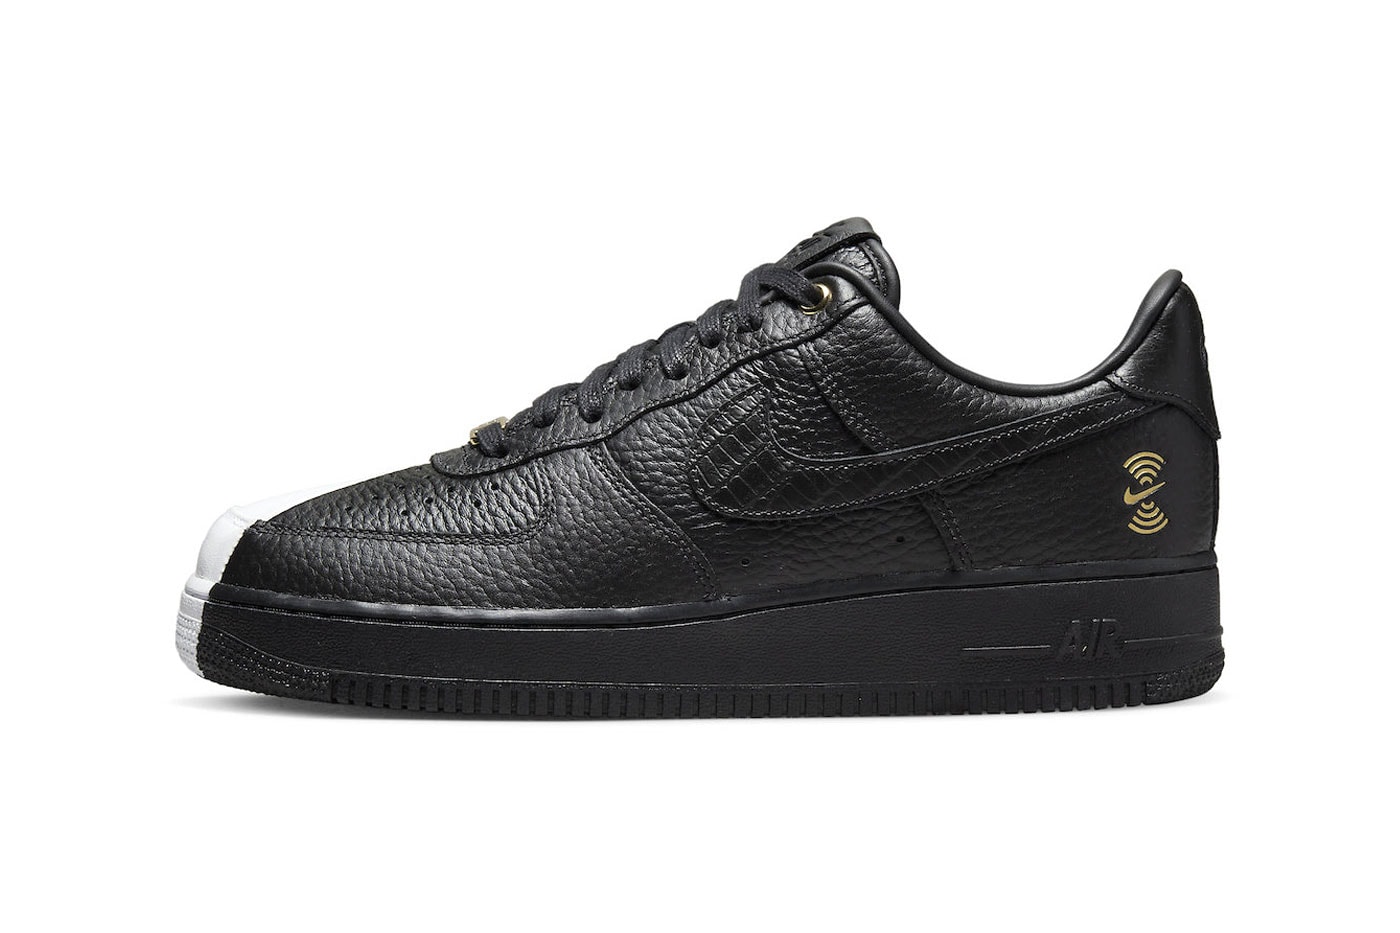 Nike Air Force 1 Low Anniversary Edition Surfaces in a Split Design